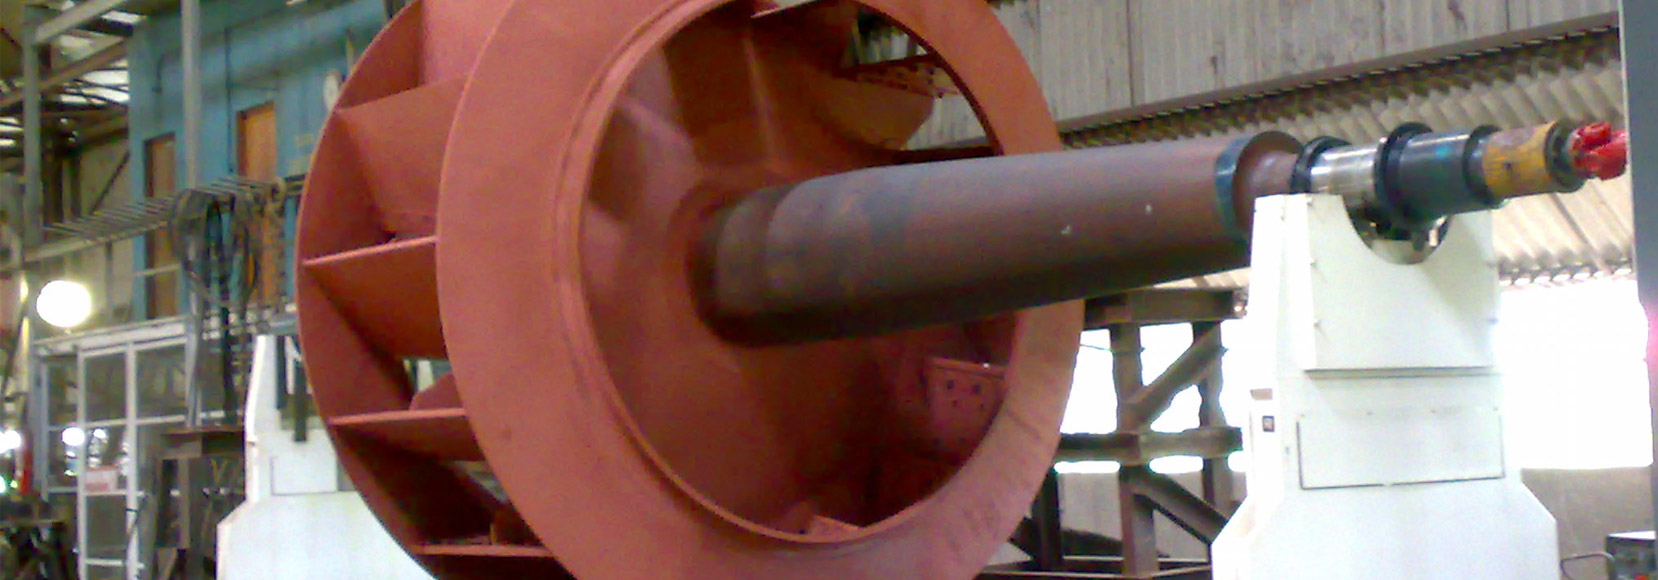 3186 mm DI Non-Yule Impeller & Shaft Assembly.